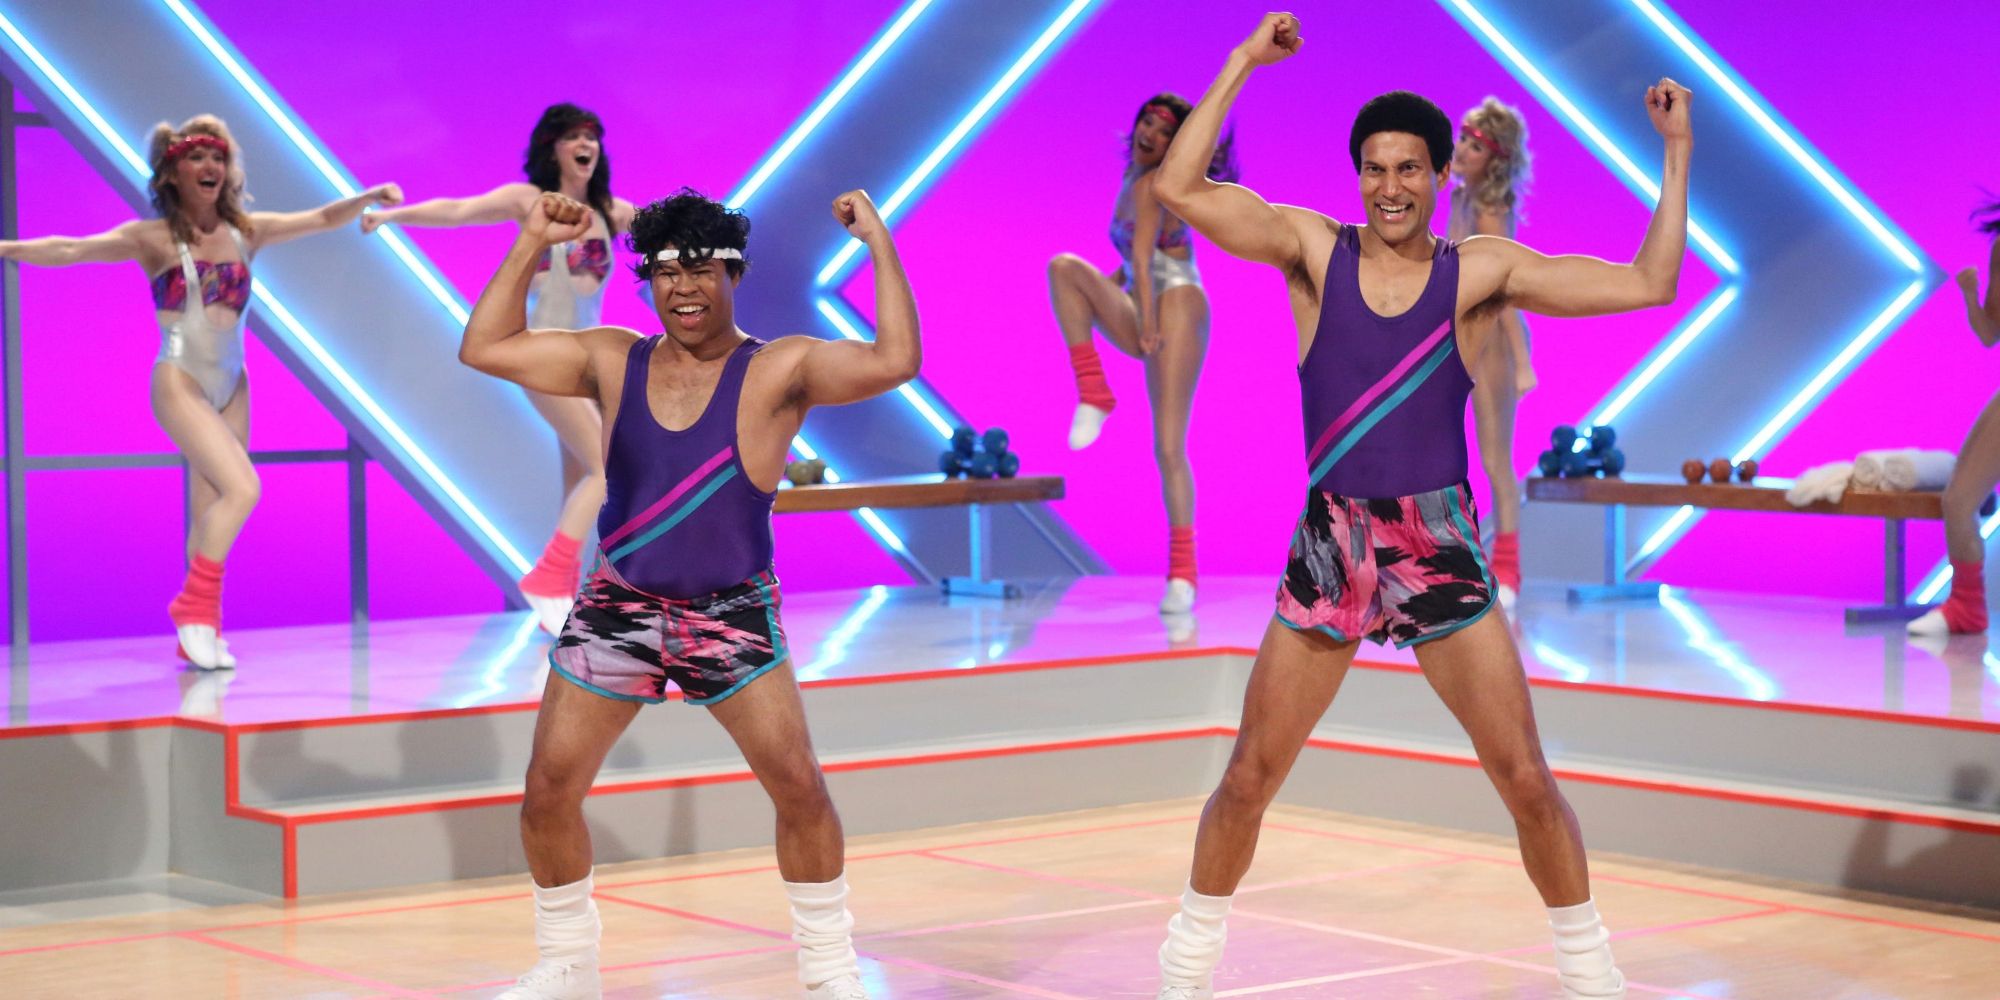 key and peele 1987 jazz fit championships sketch